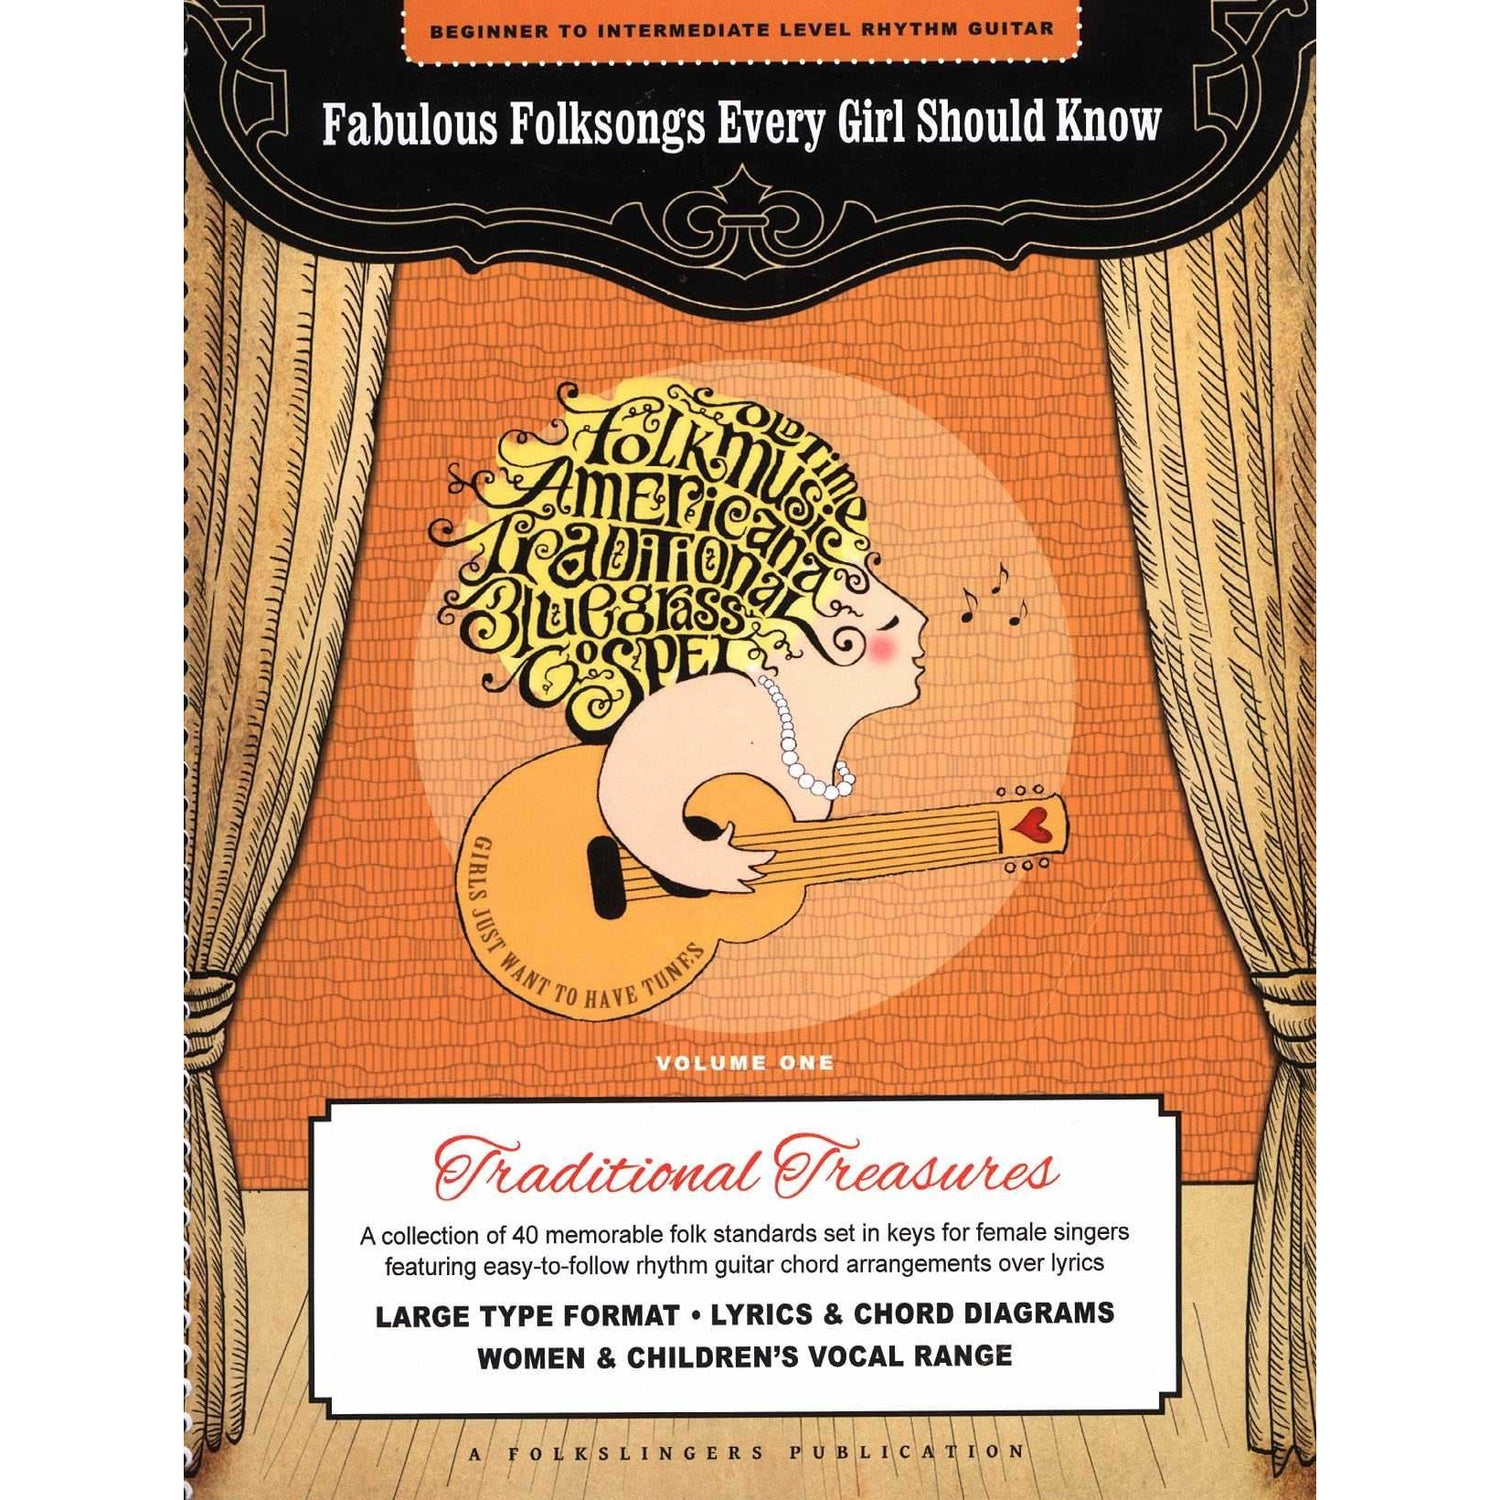 Image 1 of Fabulous Folksongs Every Girl Should Know - Volume One: Traditional Treasures - SKU# 459-1 : Product Type Media : Elderly Instruments